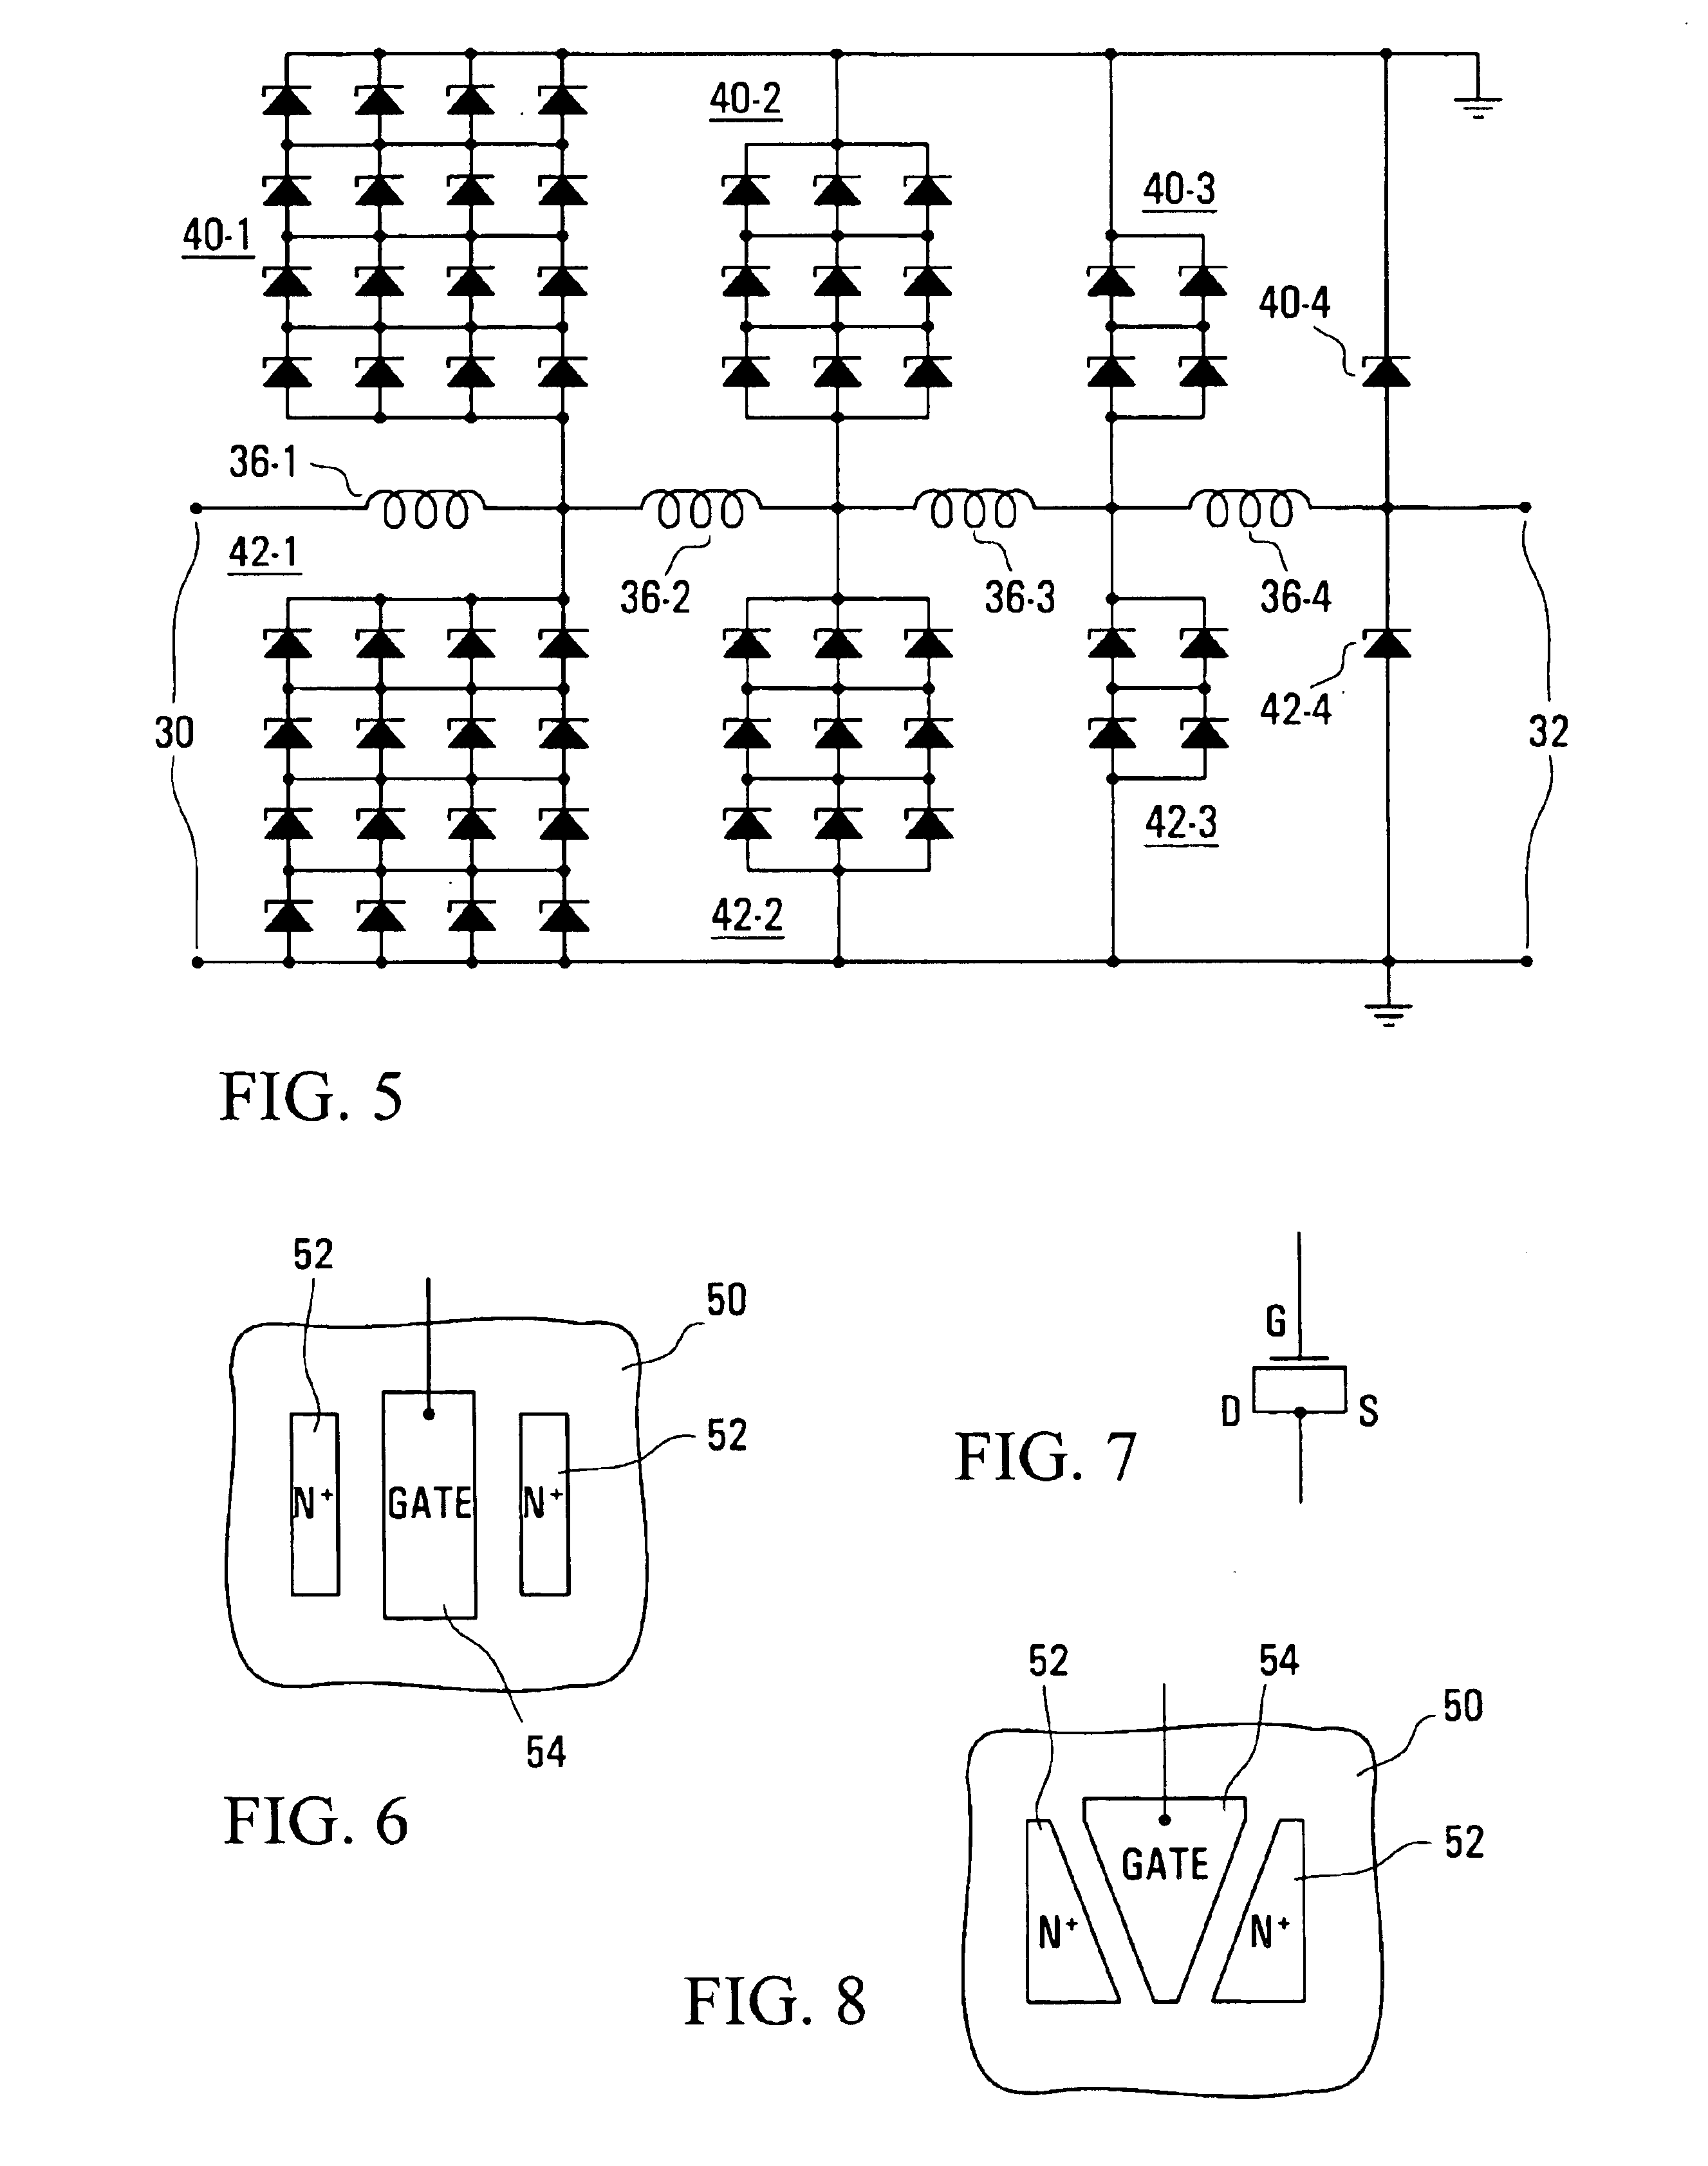 Input power limiter for a microwave receiver